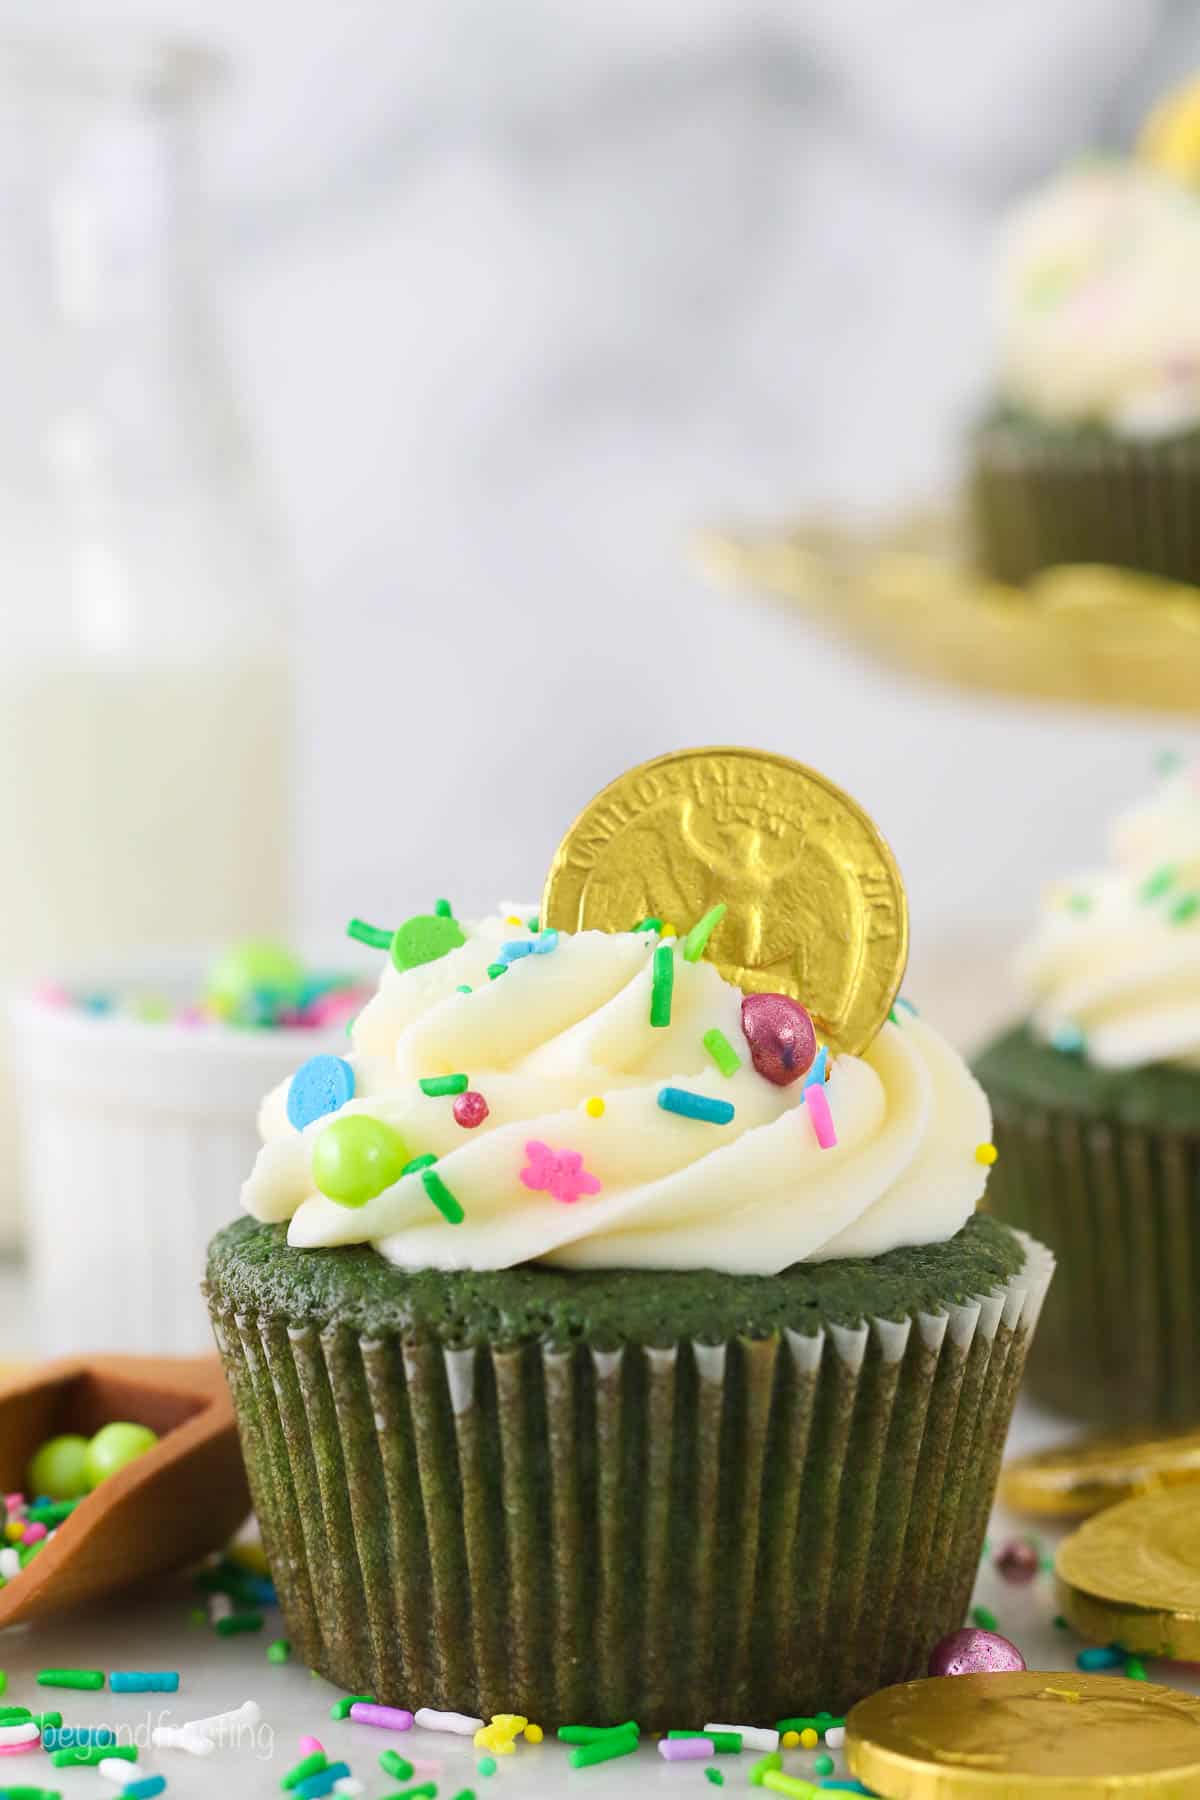 A green cupcake decorated for St. Patrick's Day with sprinkles and a gold coin